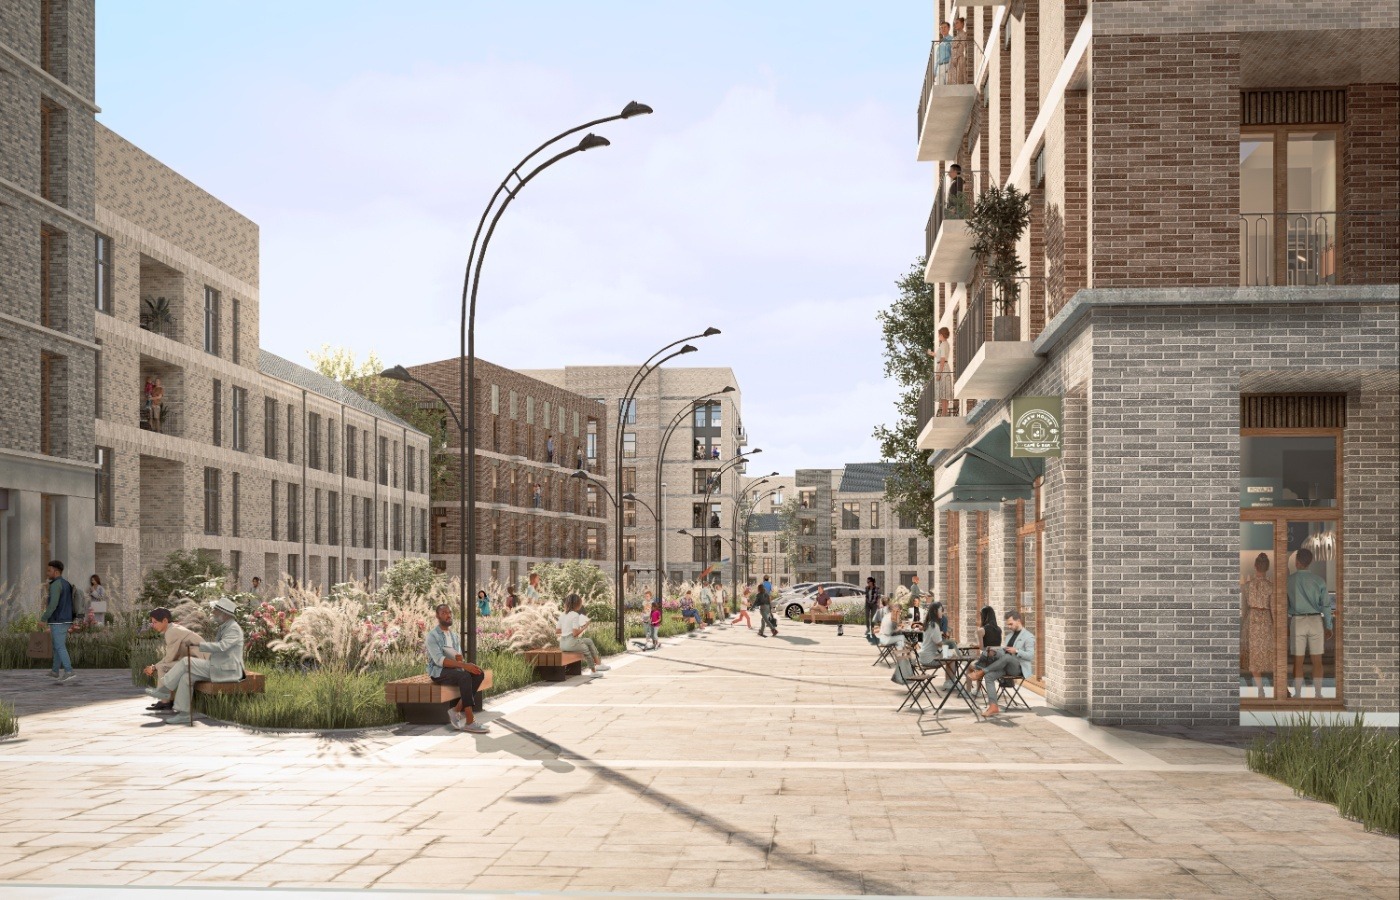 The plans for the redevelopment of East Kilbride town centre.